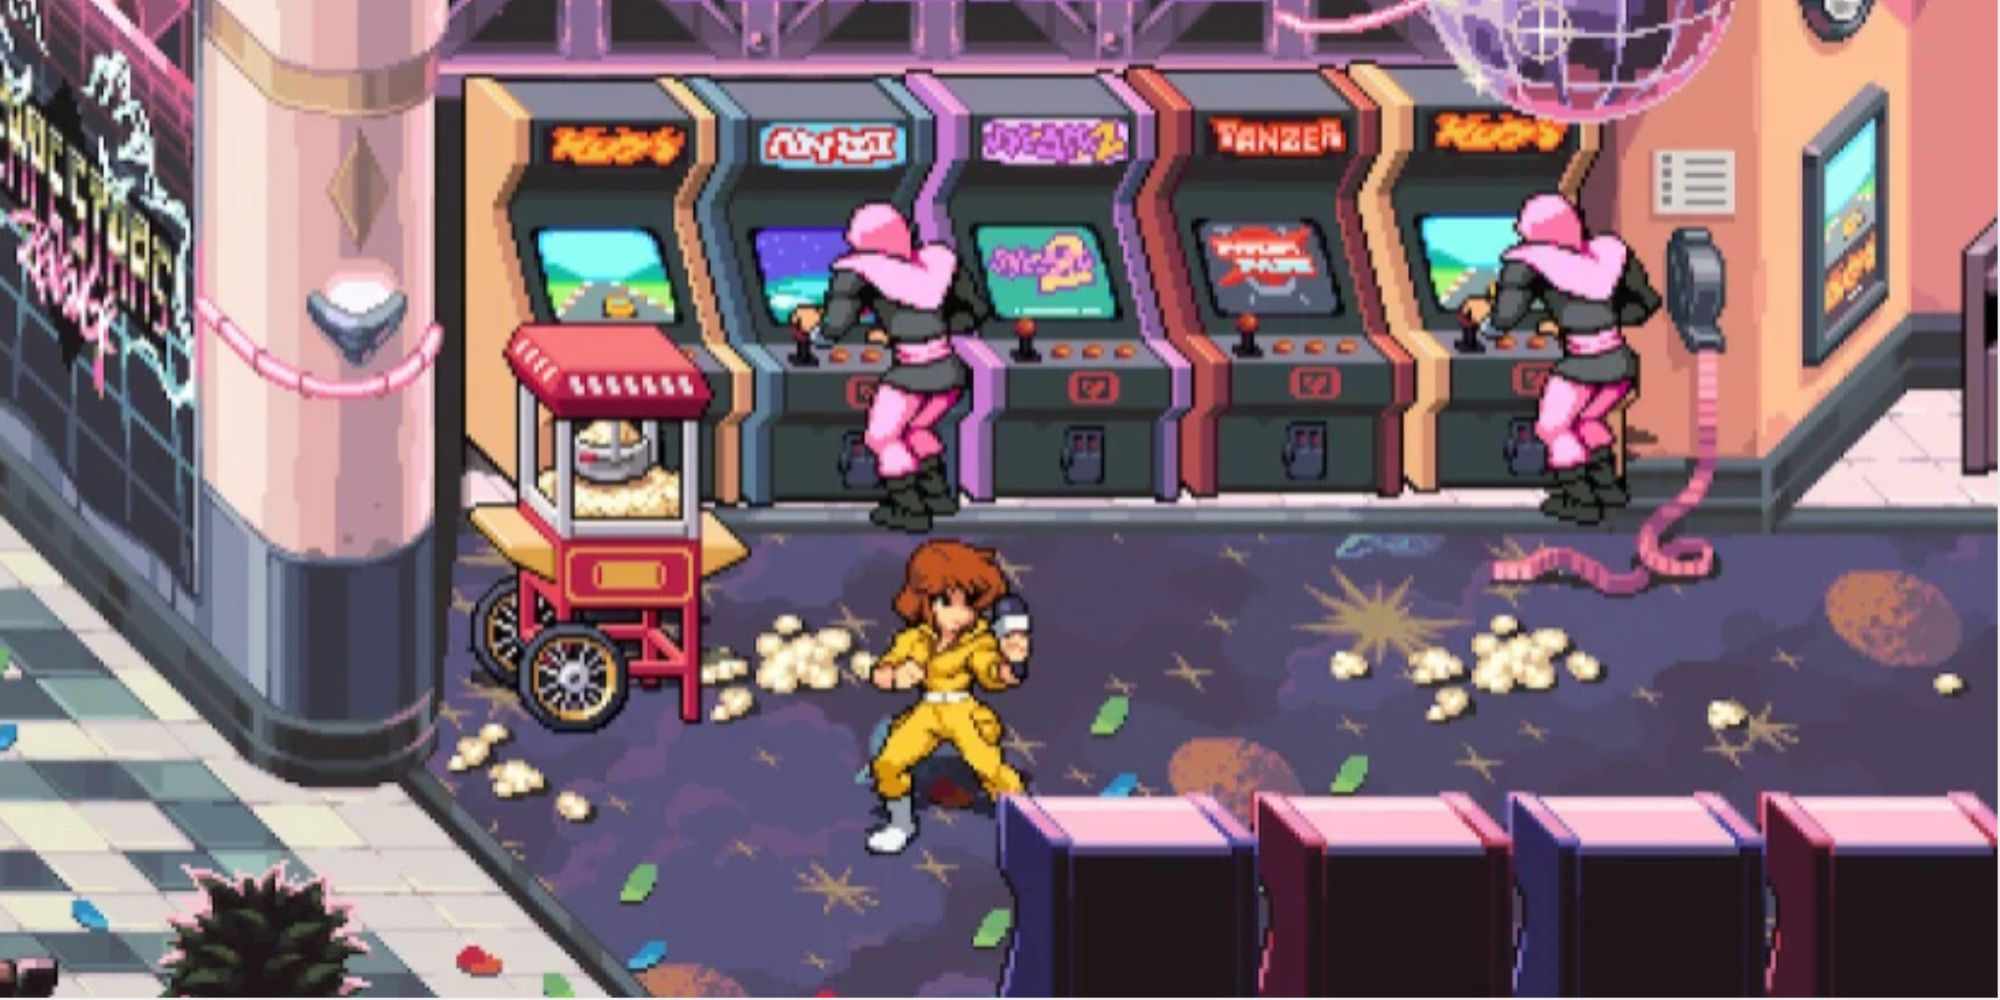 April standing in an Arcade beside a popcorn machine and a couple of Foot Ninjas playing on Arcade Cabinets in Teenage Mutant Ninja Turtles: Shredder's Revenge